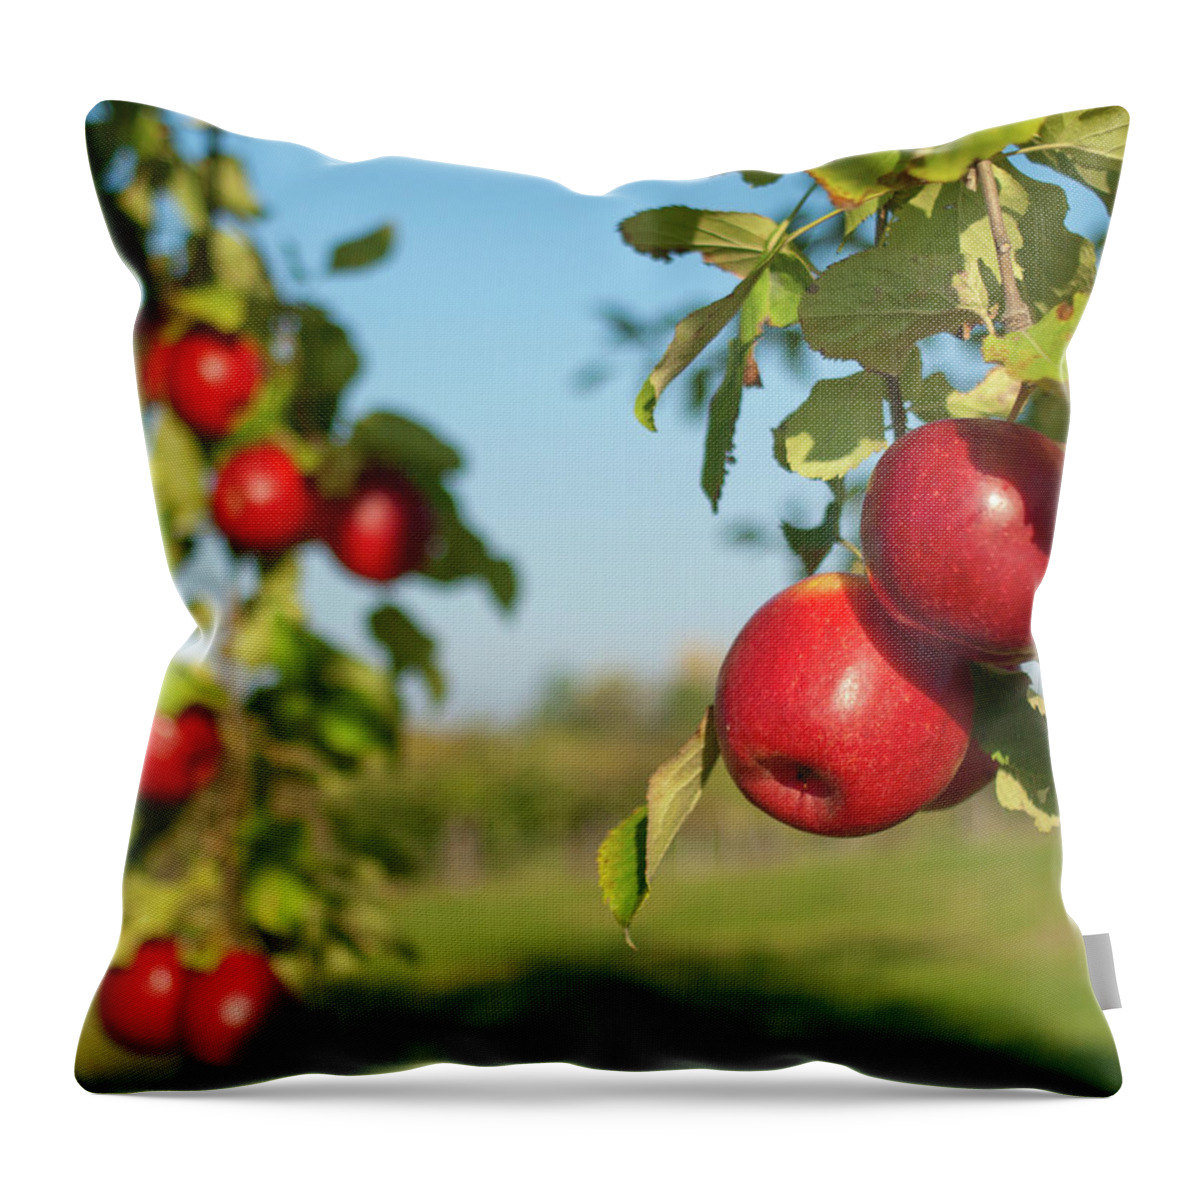 Hanging Throw Pillow featuring the photograph Herbstfarben by P a s m Photography